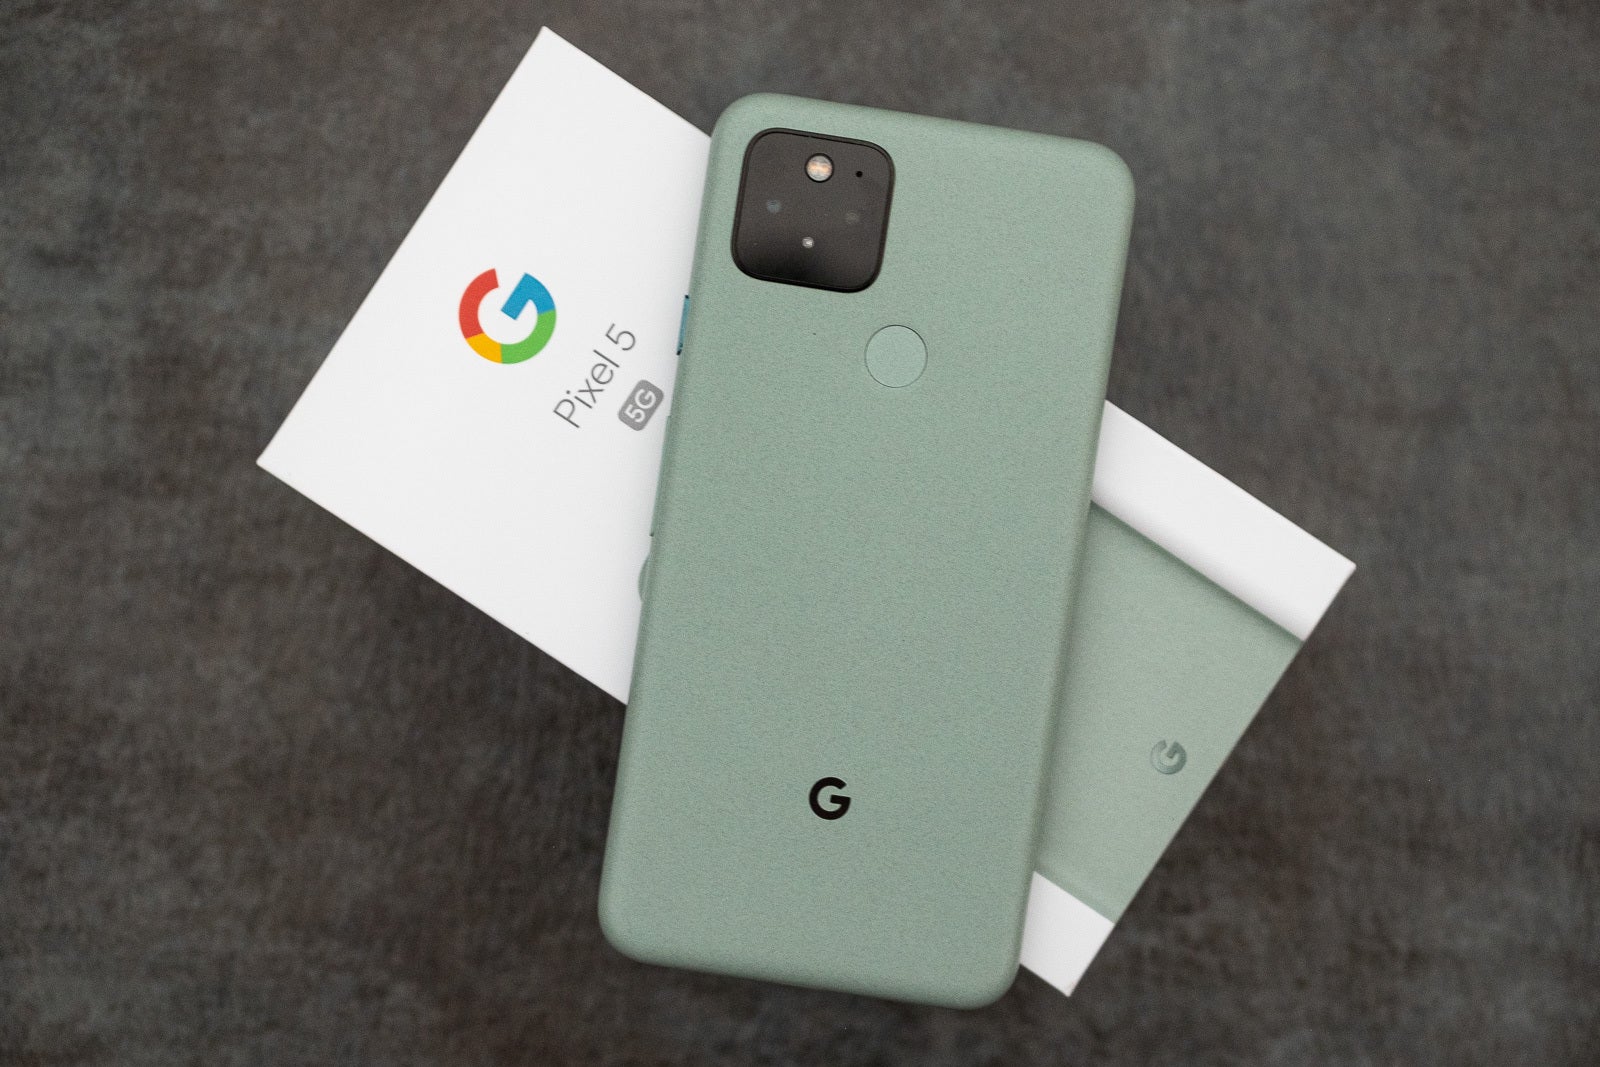 Pixel 5 release date, price, features and news